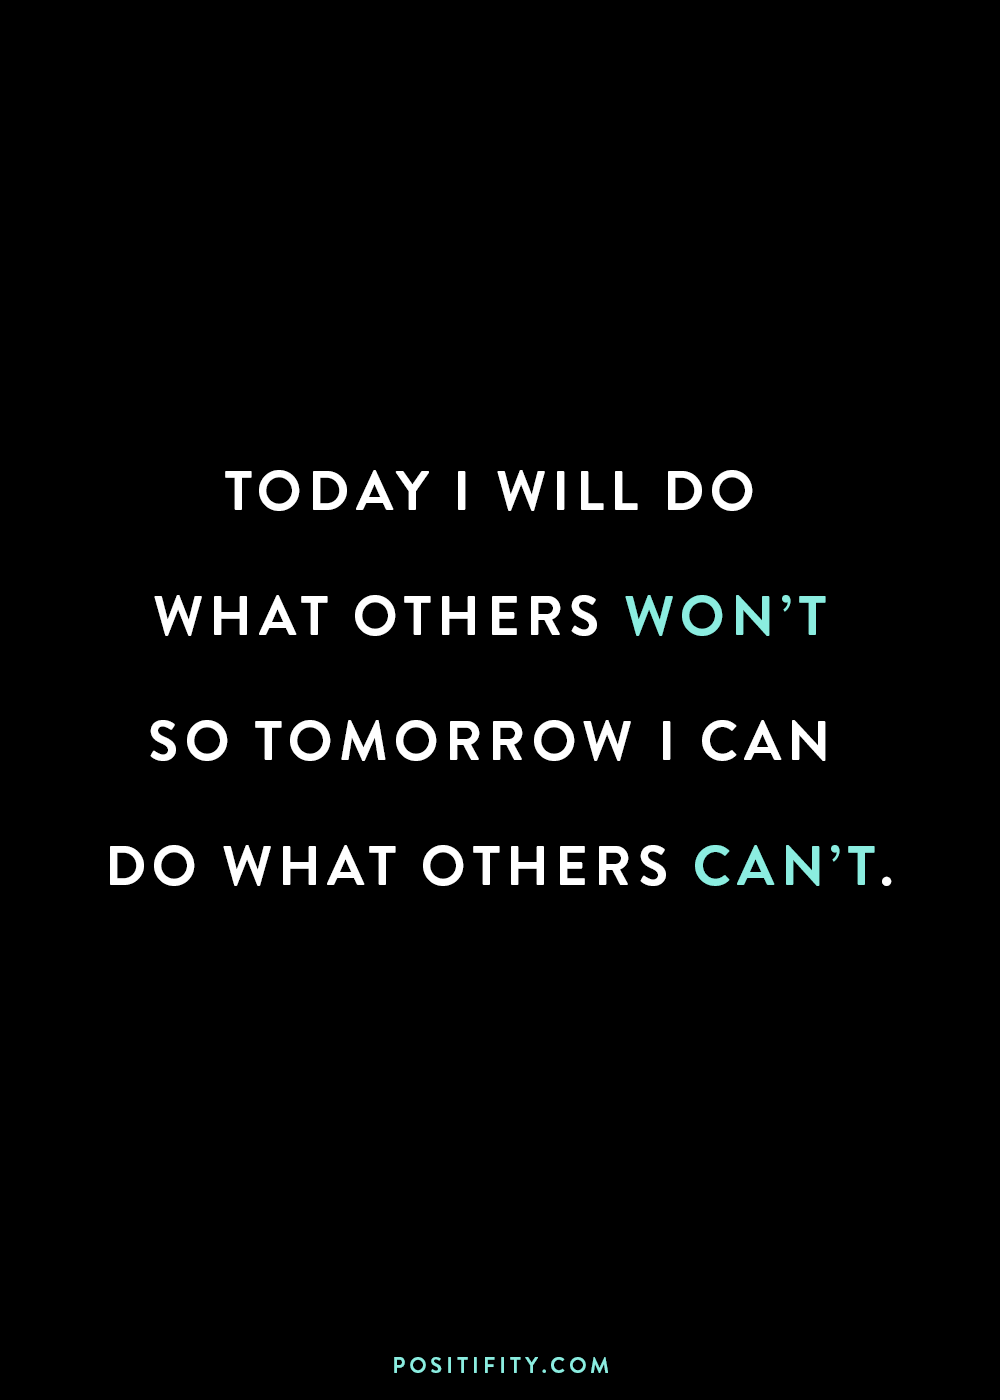 “Today I will do what others won’t, so tomorrow I can do what others can’t.”